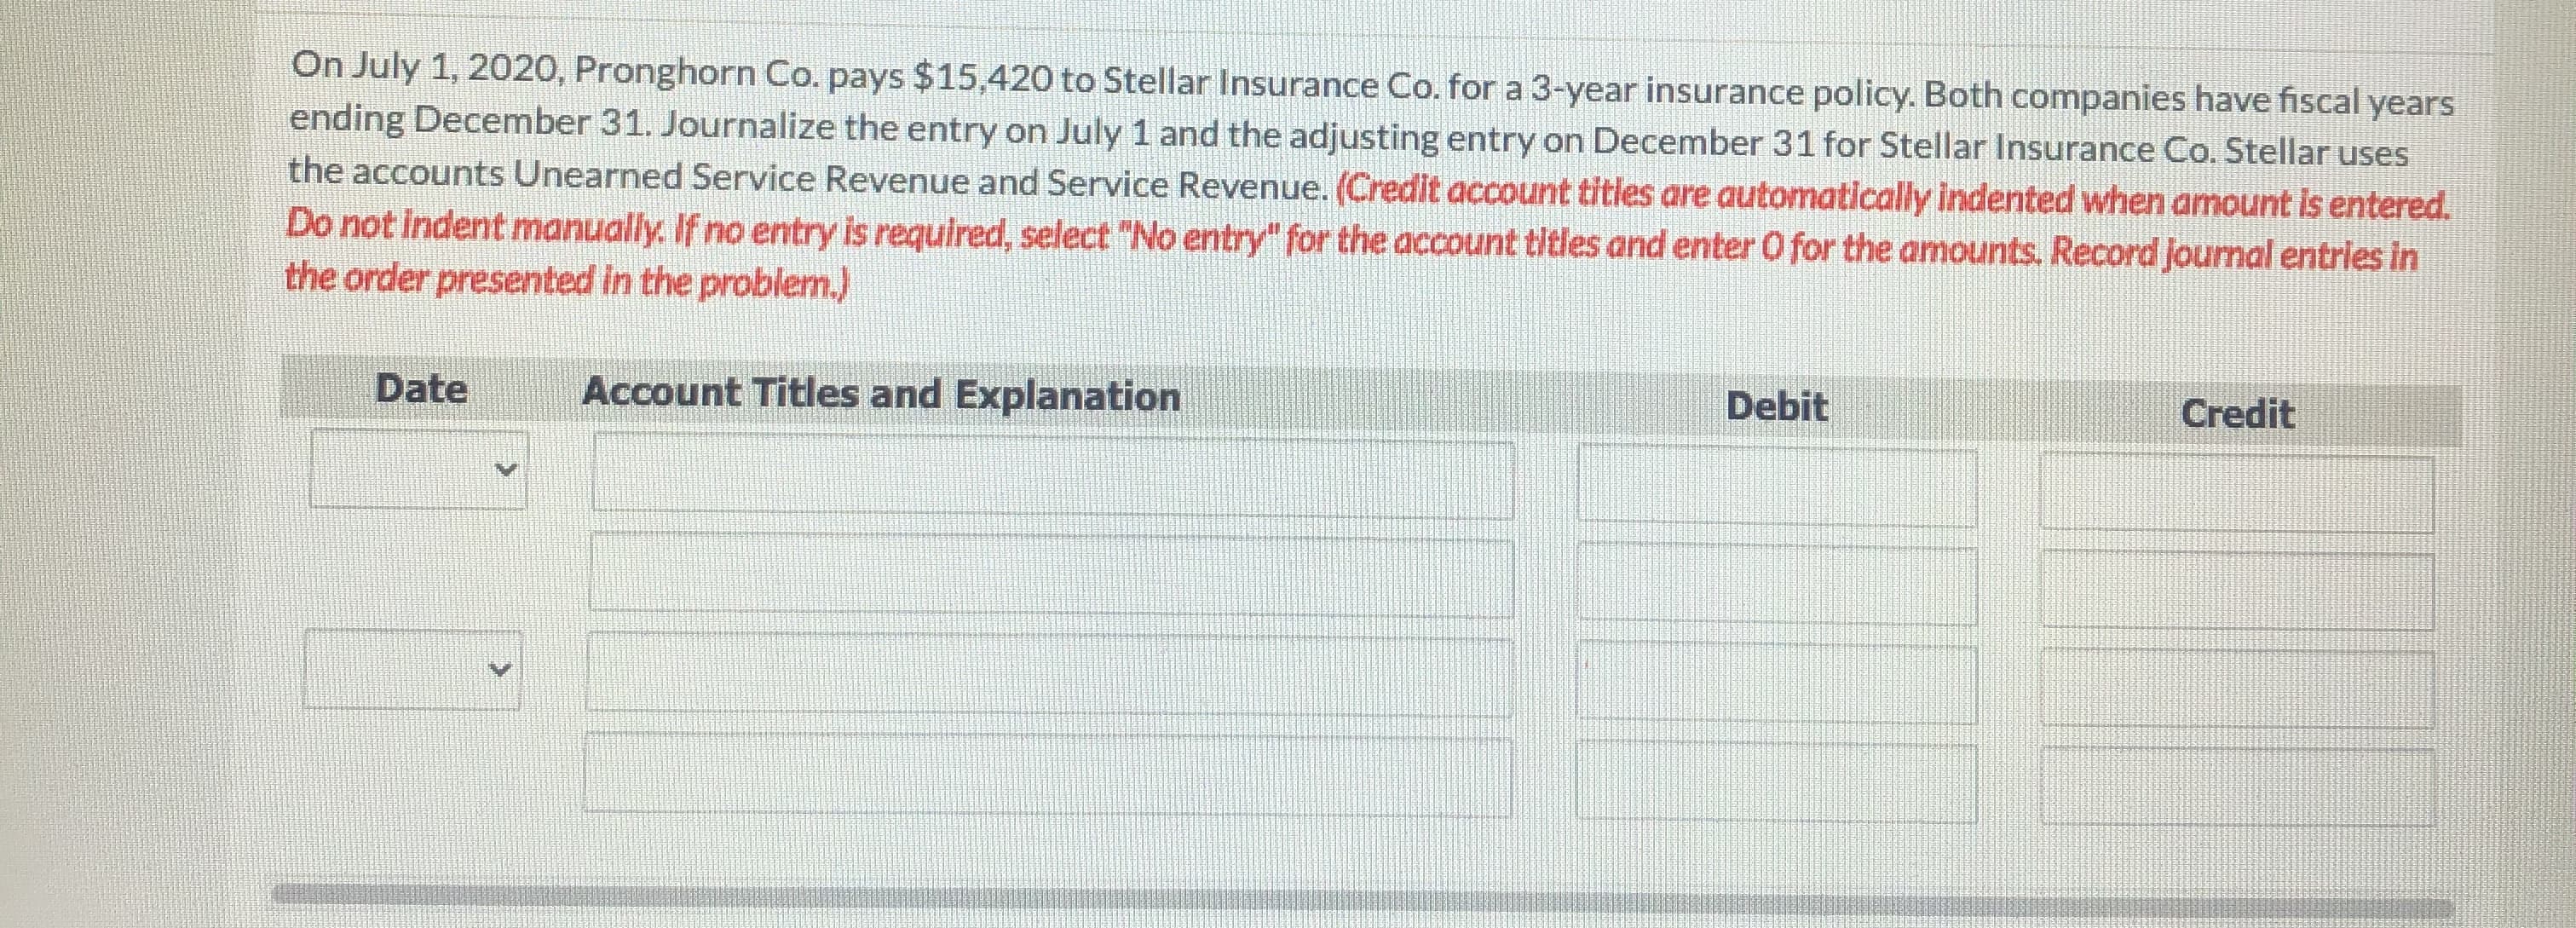 On July 1, 2020, Pronghorn Co. pays $15,420 to Stellar Insurance Co. for a 3-year insurance policy. Both companies have fiscal years
ending December 31. Journalize the entry on July 1 and the adjusting entry on December 31 for Stellar Insurance Co. Stellar uses
the accounts Unearned Service Revenue and Service Revenue. (Credit account titles are automatically indented when amount is entered.
Do not indent manually. If no entry is required, select "No entry" for the account titles and enter O for the amounts. Record journal entries in
the order presented in the problem.)
